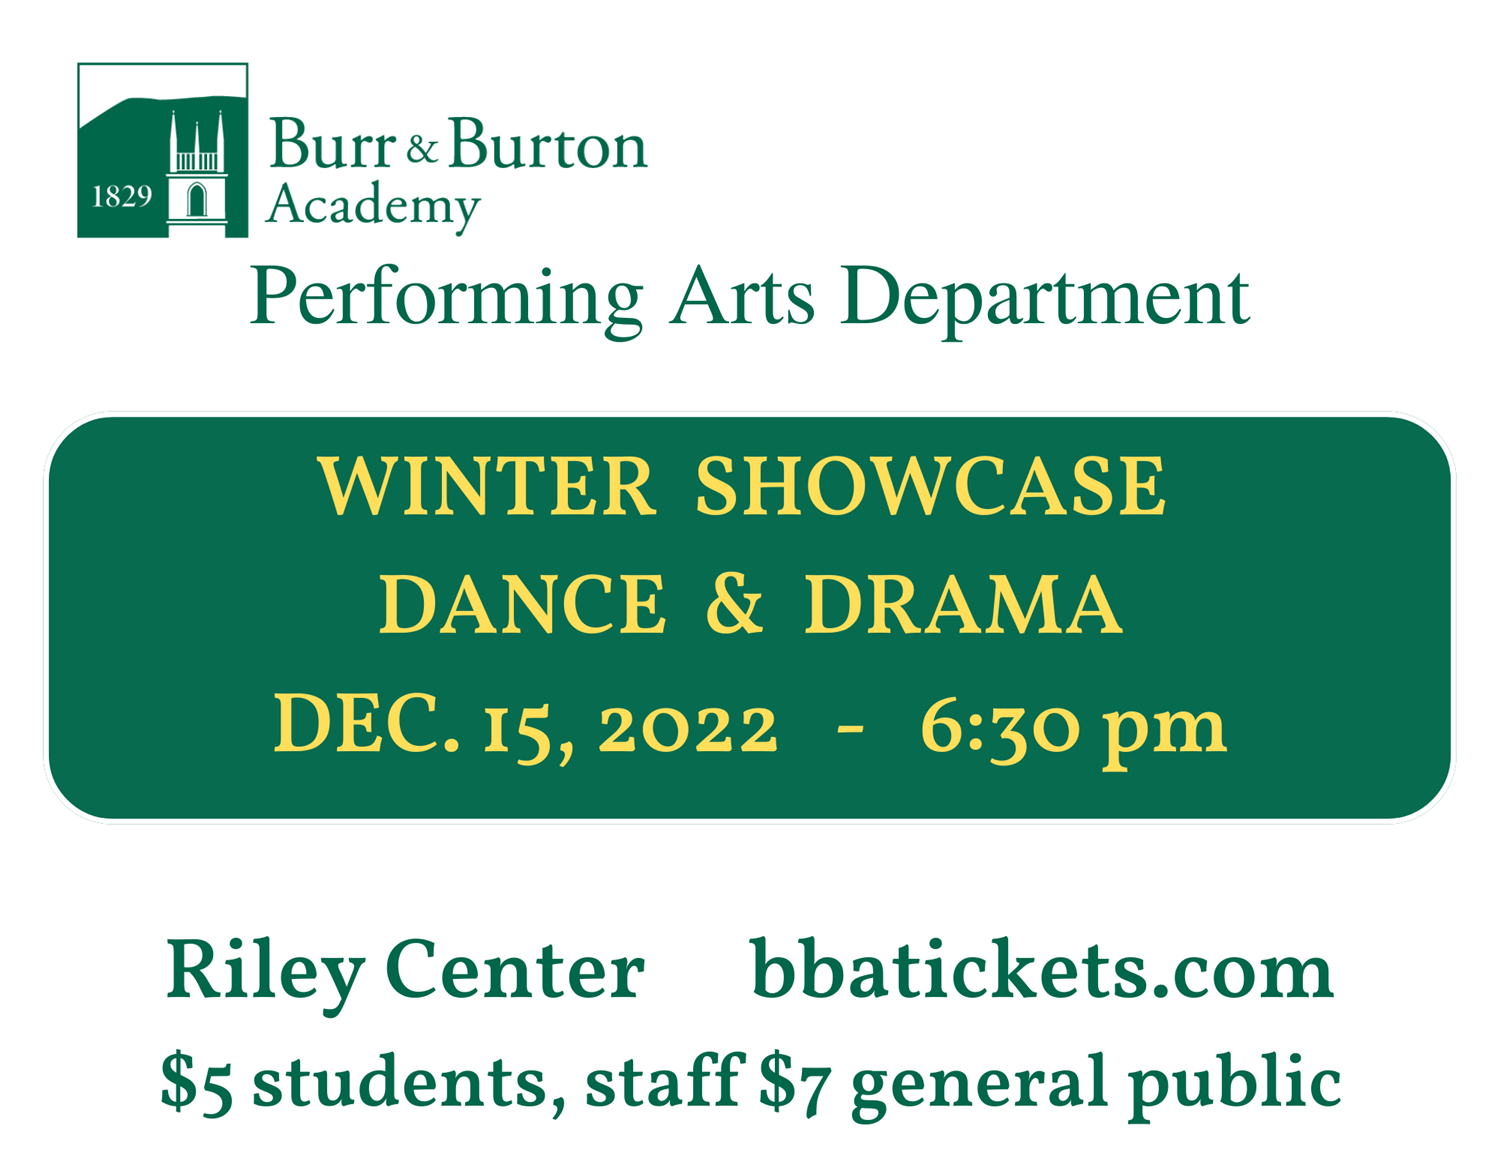 Winter Showcase Dance and Drama BBA Performing Arts Department Showcase on Dec 15, 18:30@BBA Riley Center - Pick a seat, Buy tickets and Get information on Burr and Burton Academy 